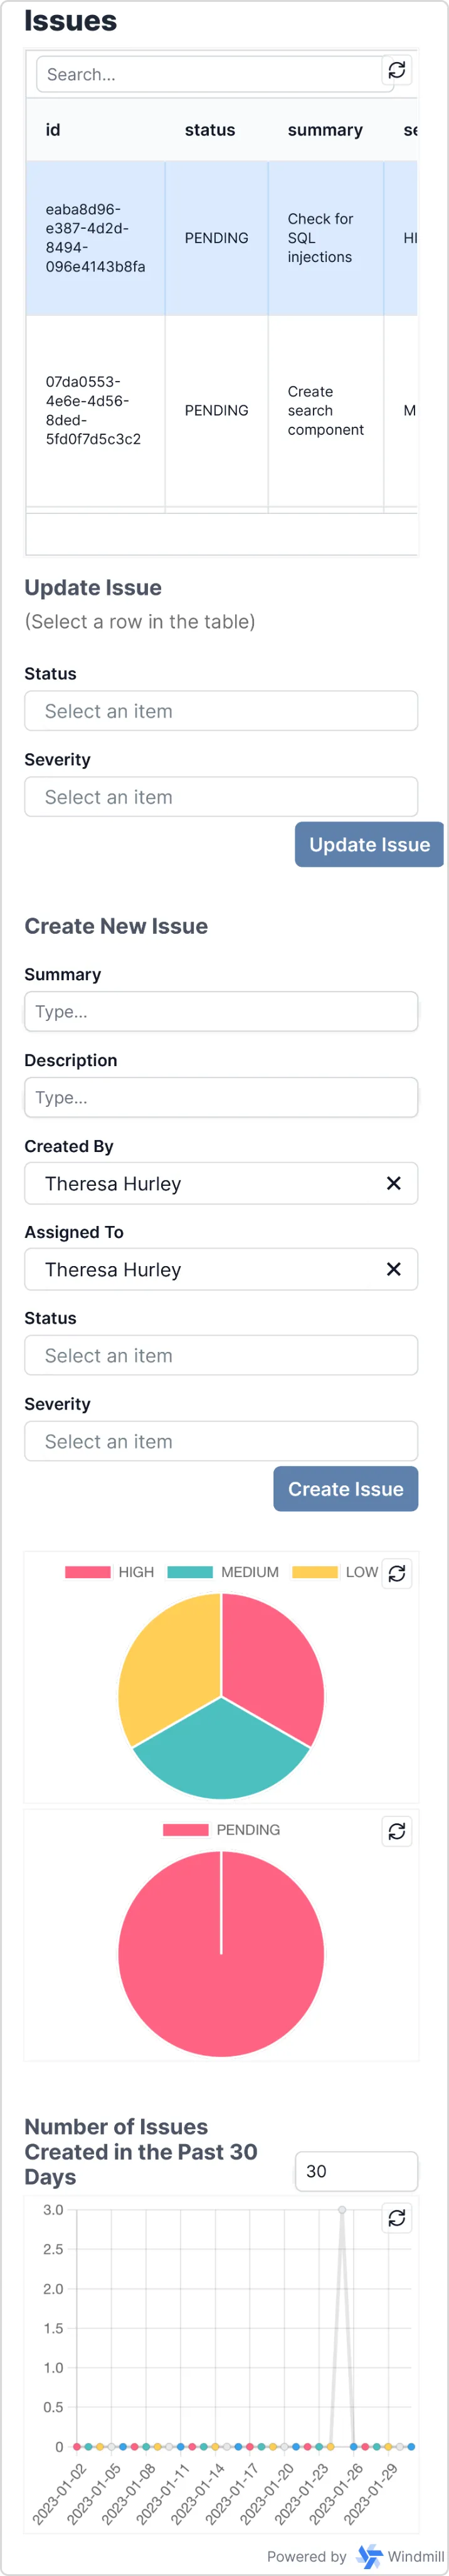 Mobile layout of the issue tracker app